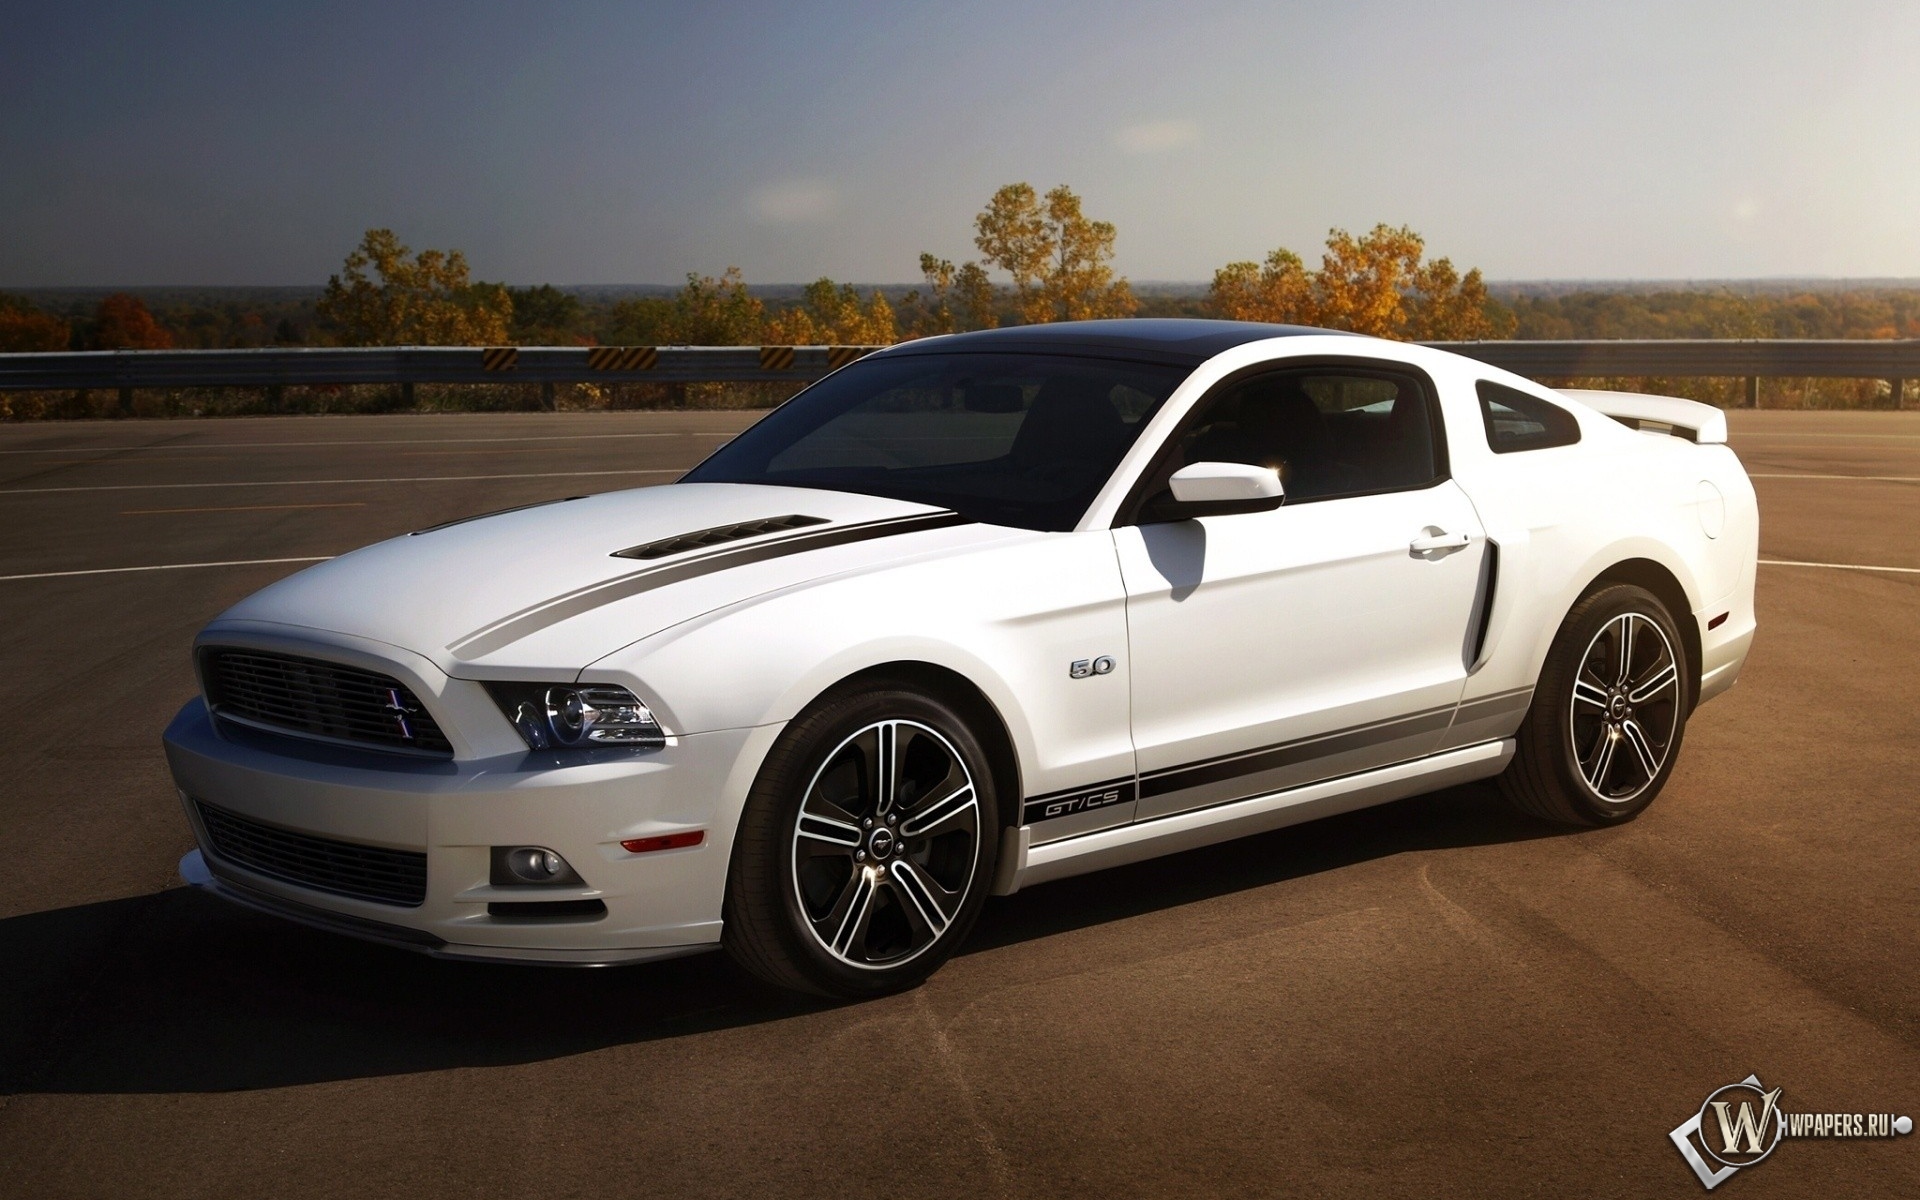 A Look at the 2013 Ford Mustang - thoughtco.com